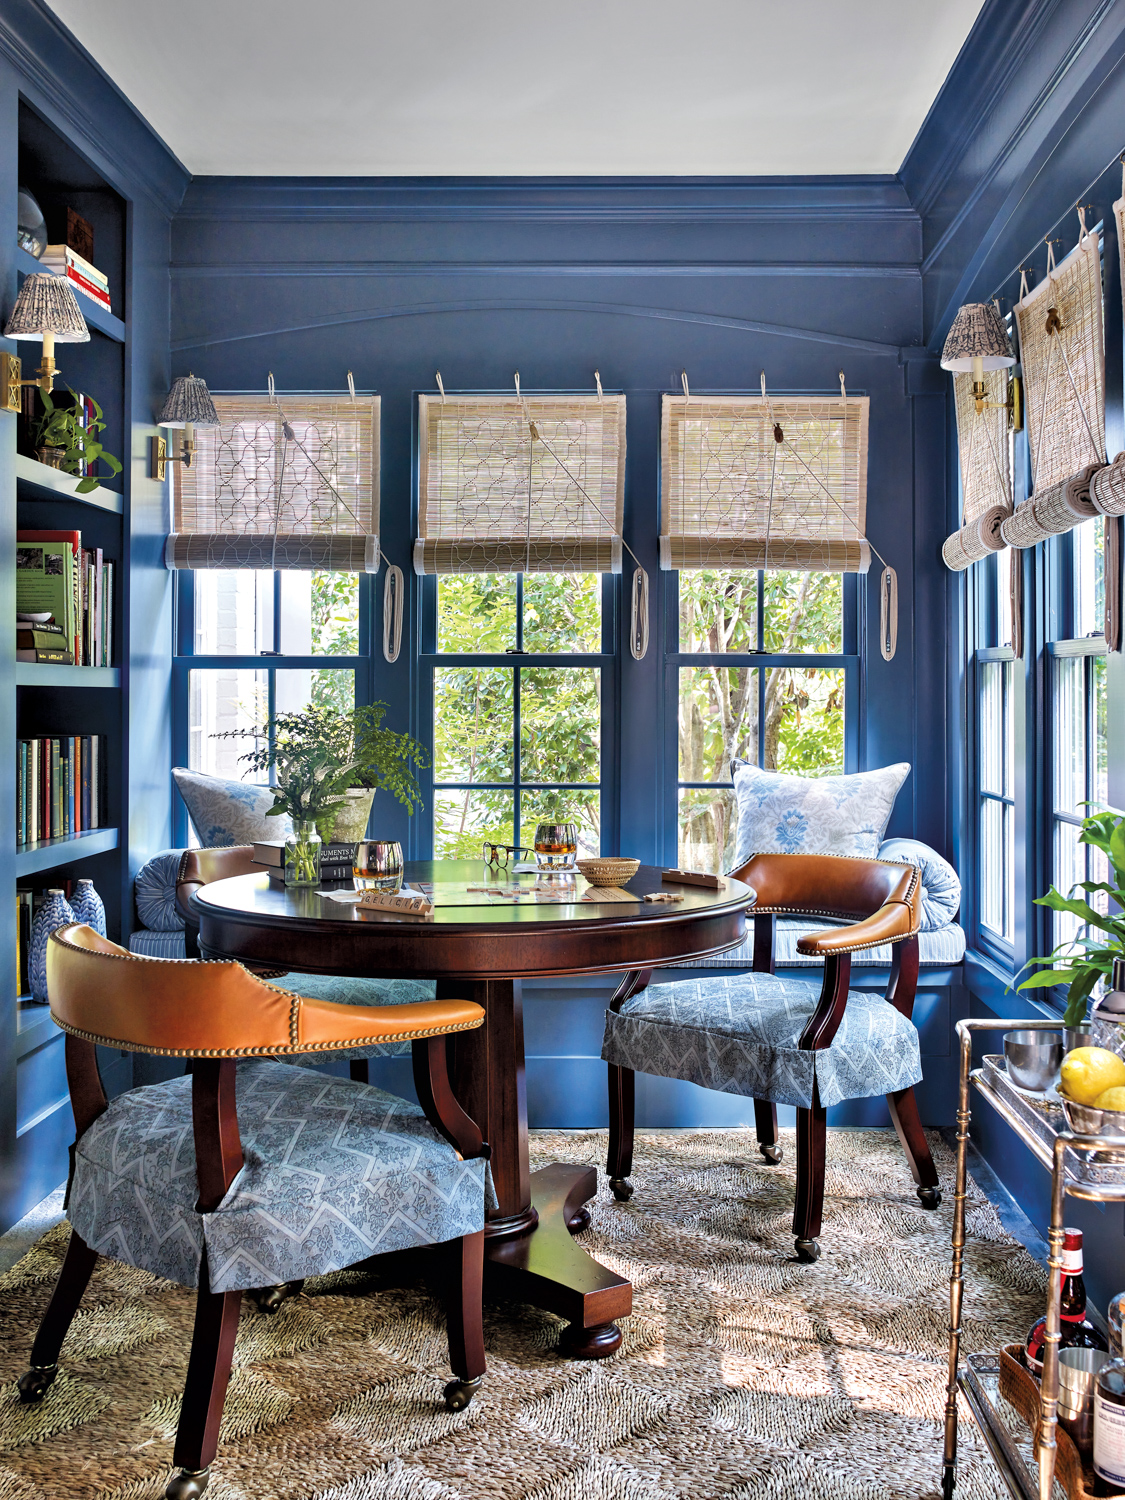 Lauren E. Lowe office nook with dark wood table and chairs upholstered in a blue fabric and painted blue